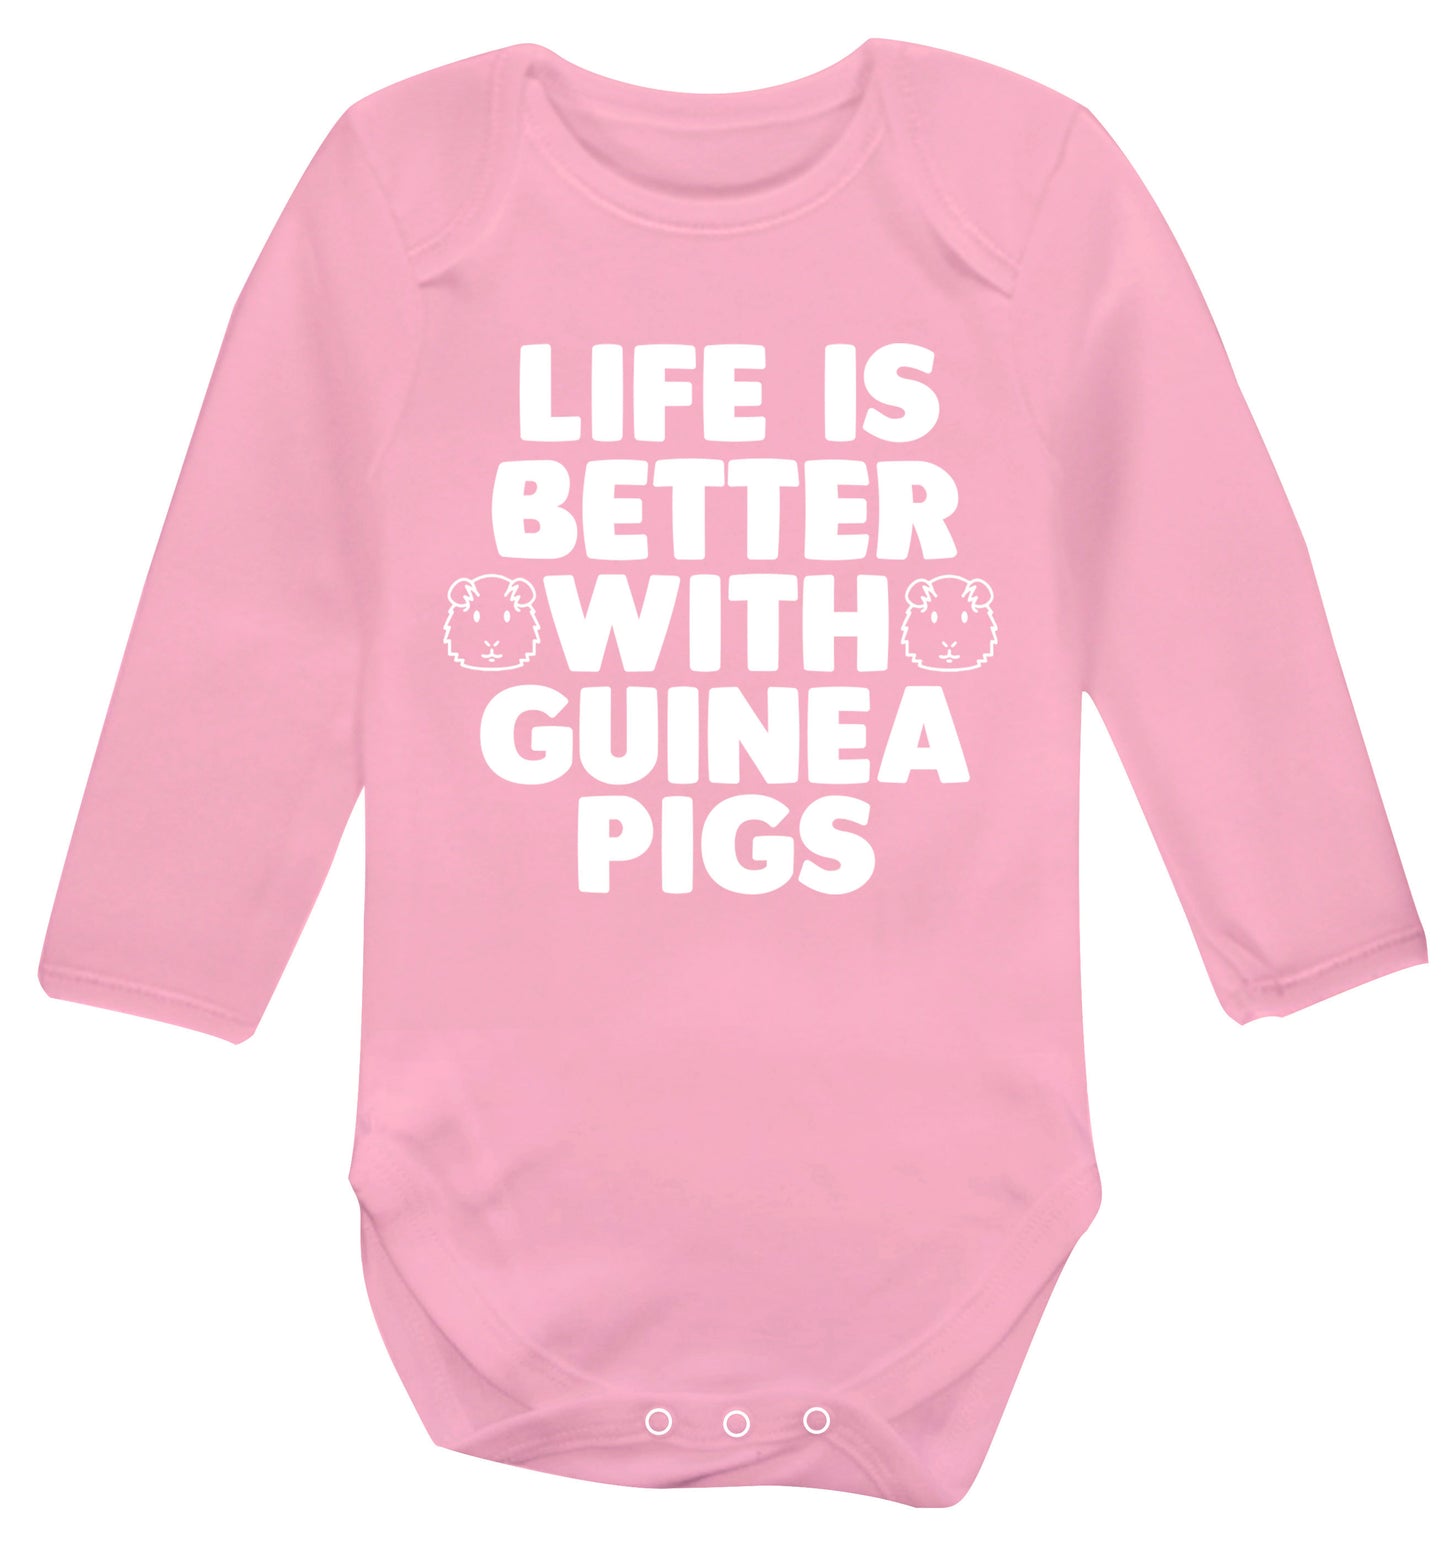 Life is better with guinea pigs Baby Vest long sleeved pale pink 6-12 months